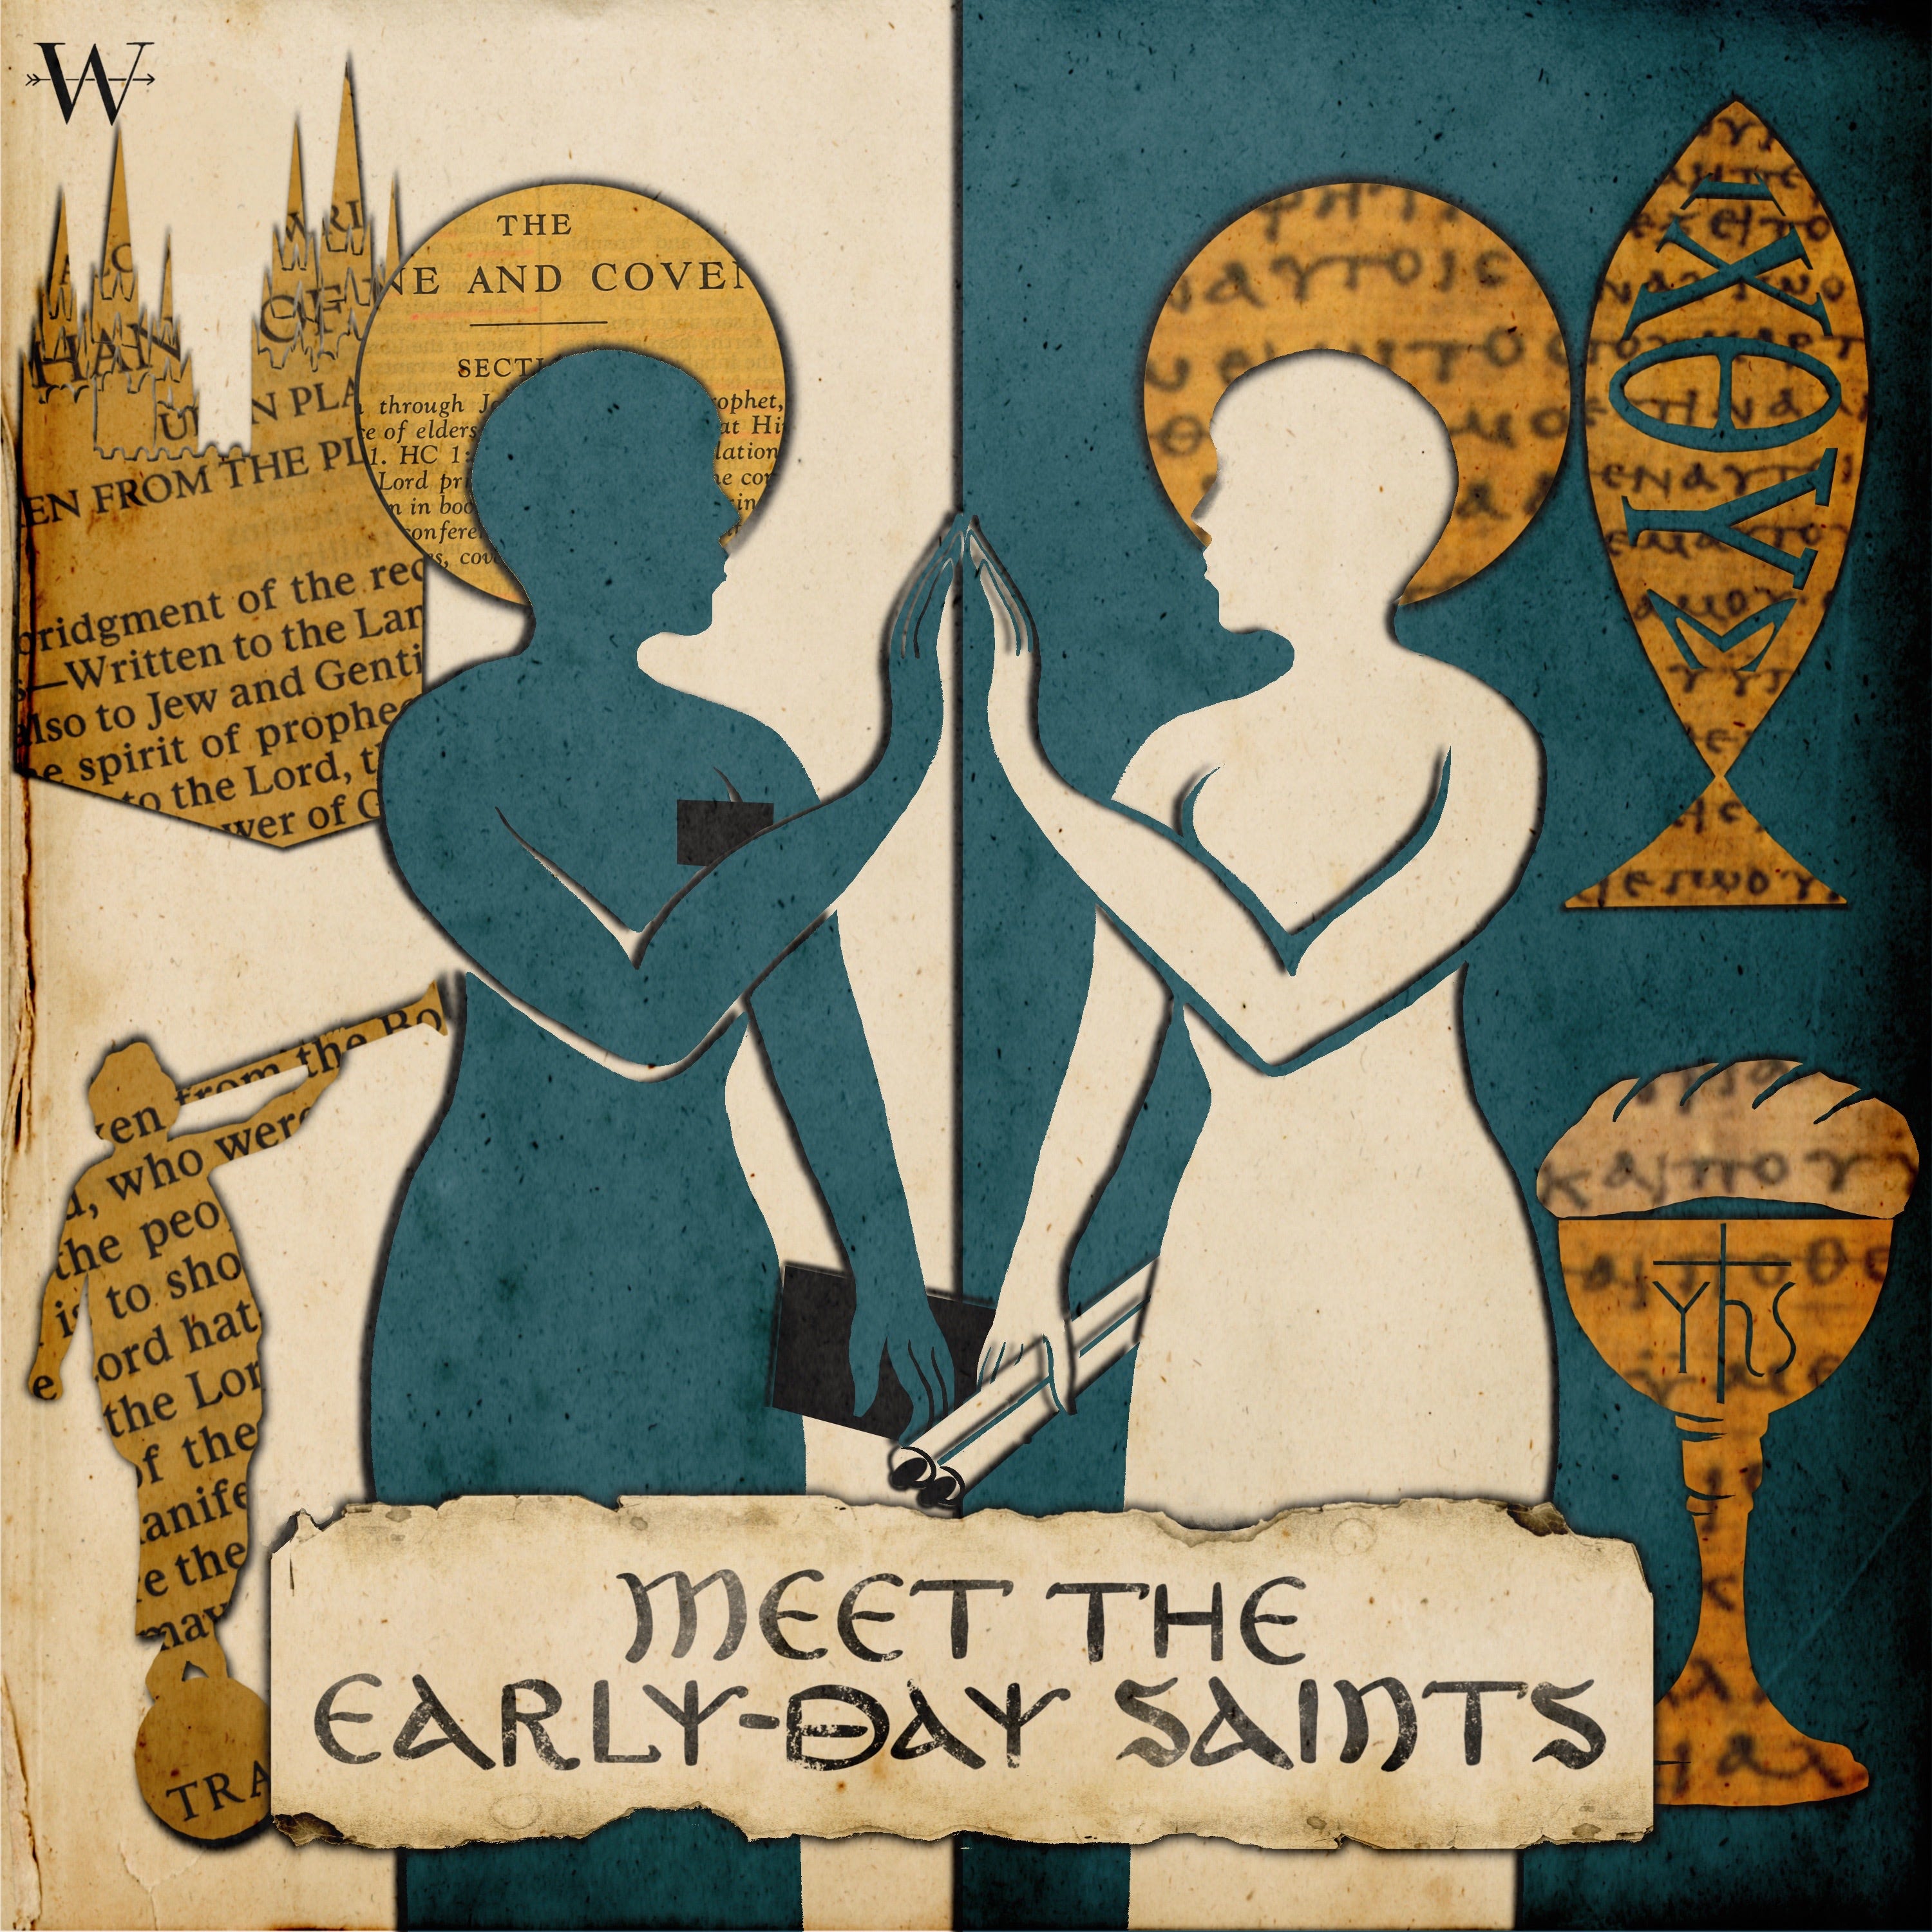 Meet the Early-day Saints Episode 9: Atonement and Grace, with Cecilia M. Peek